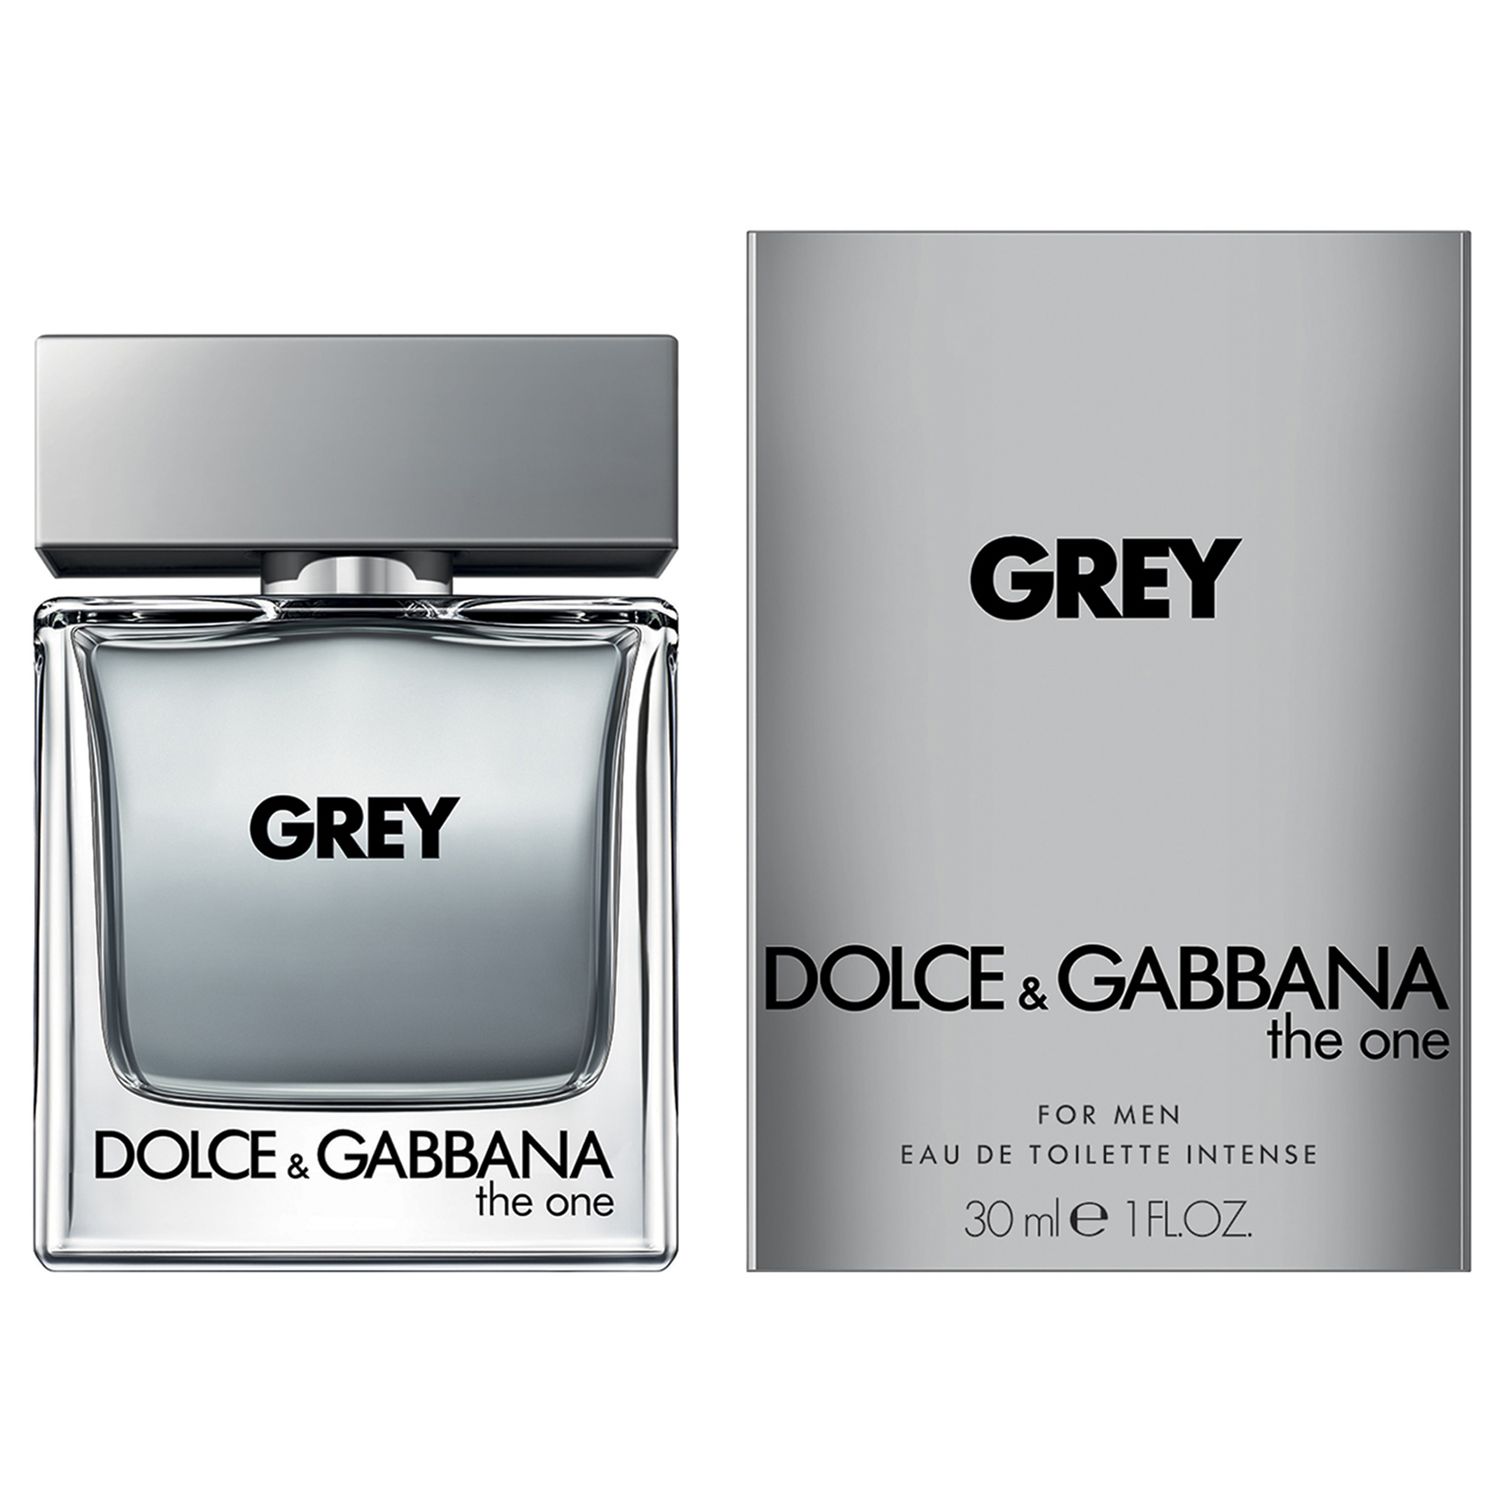 dolce and gabbana grey review